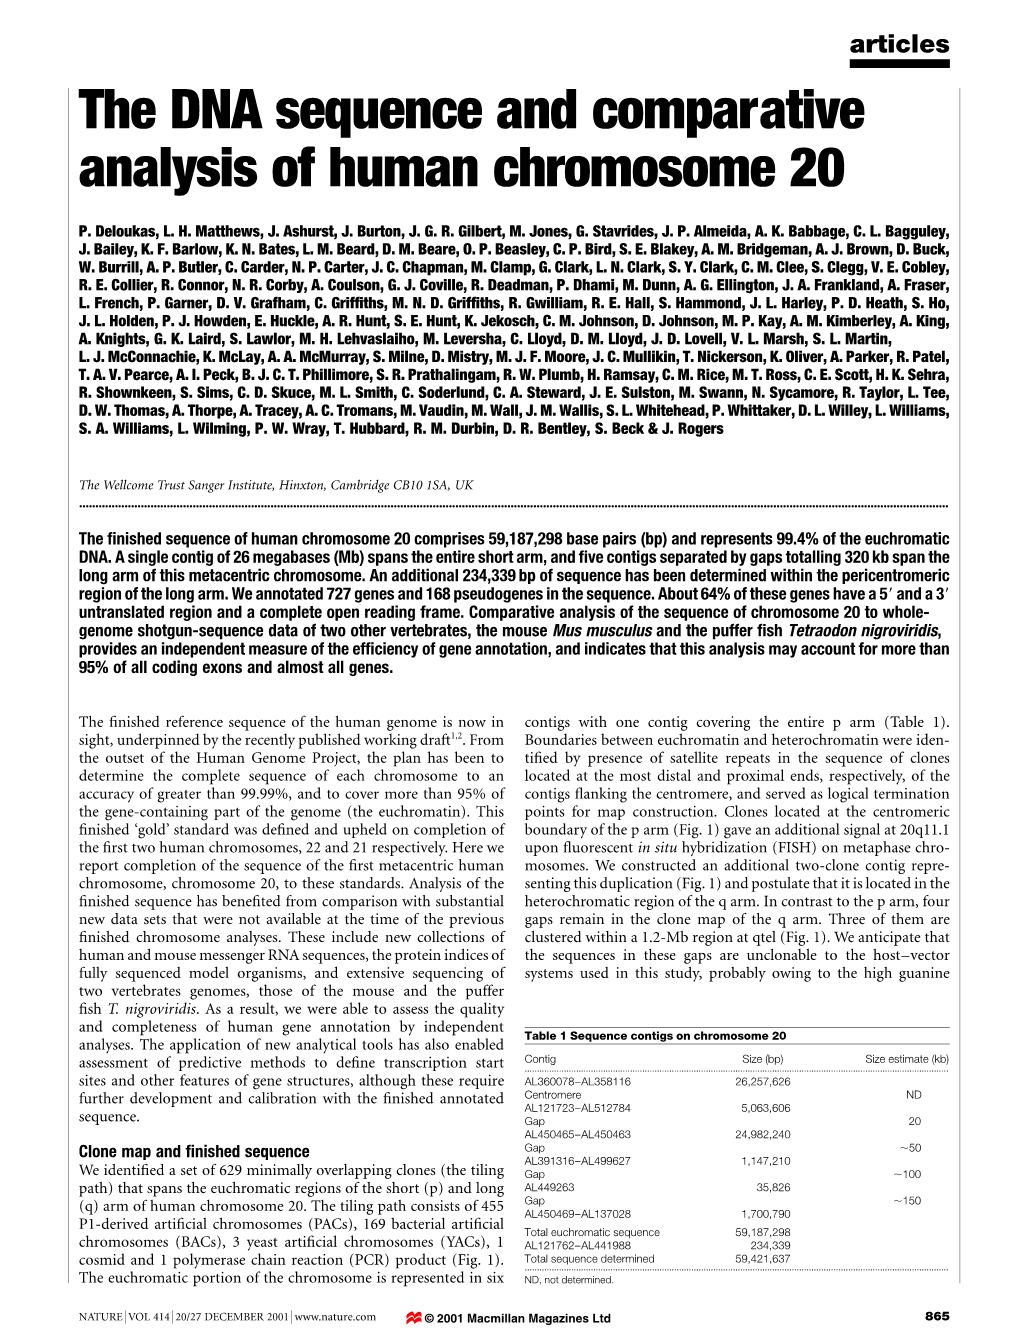 The DNA Sequence and Comparative Analysis of Human Chromosome 20